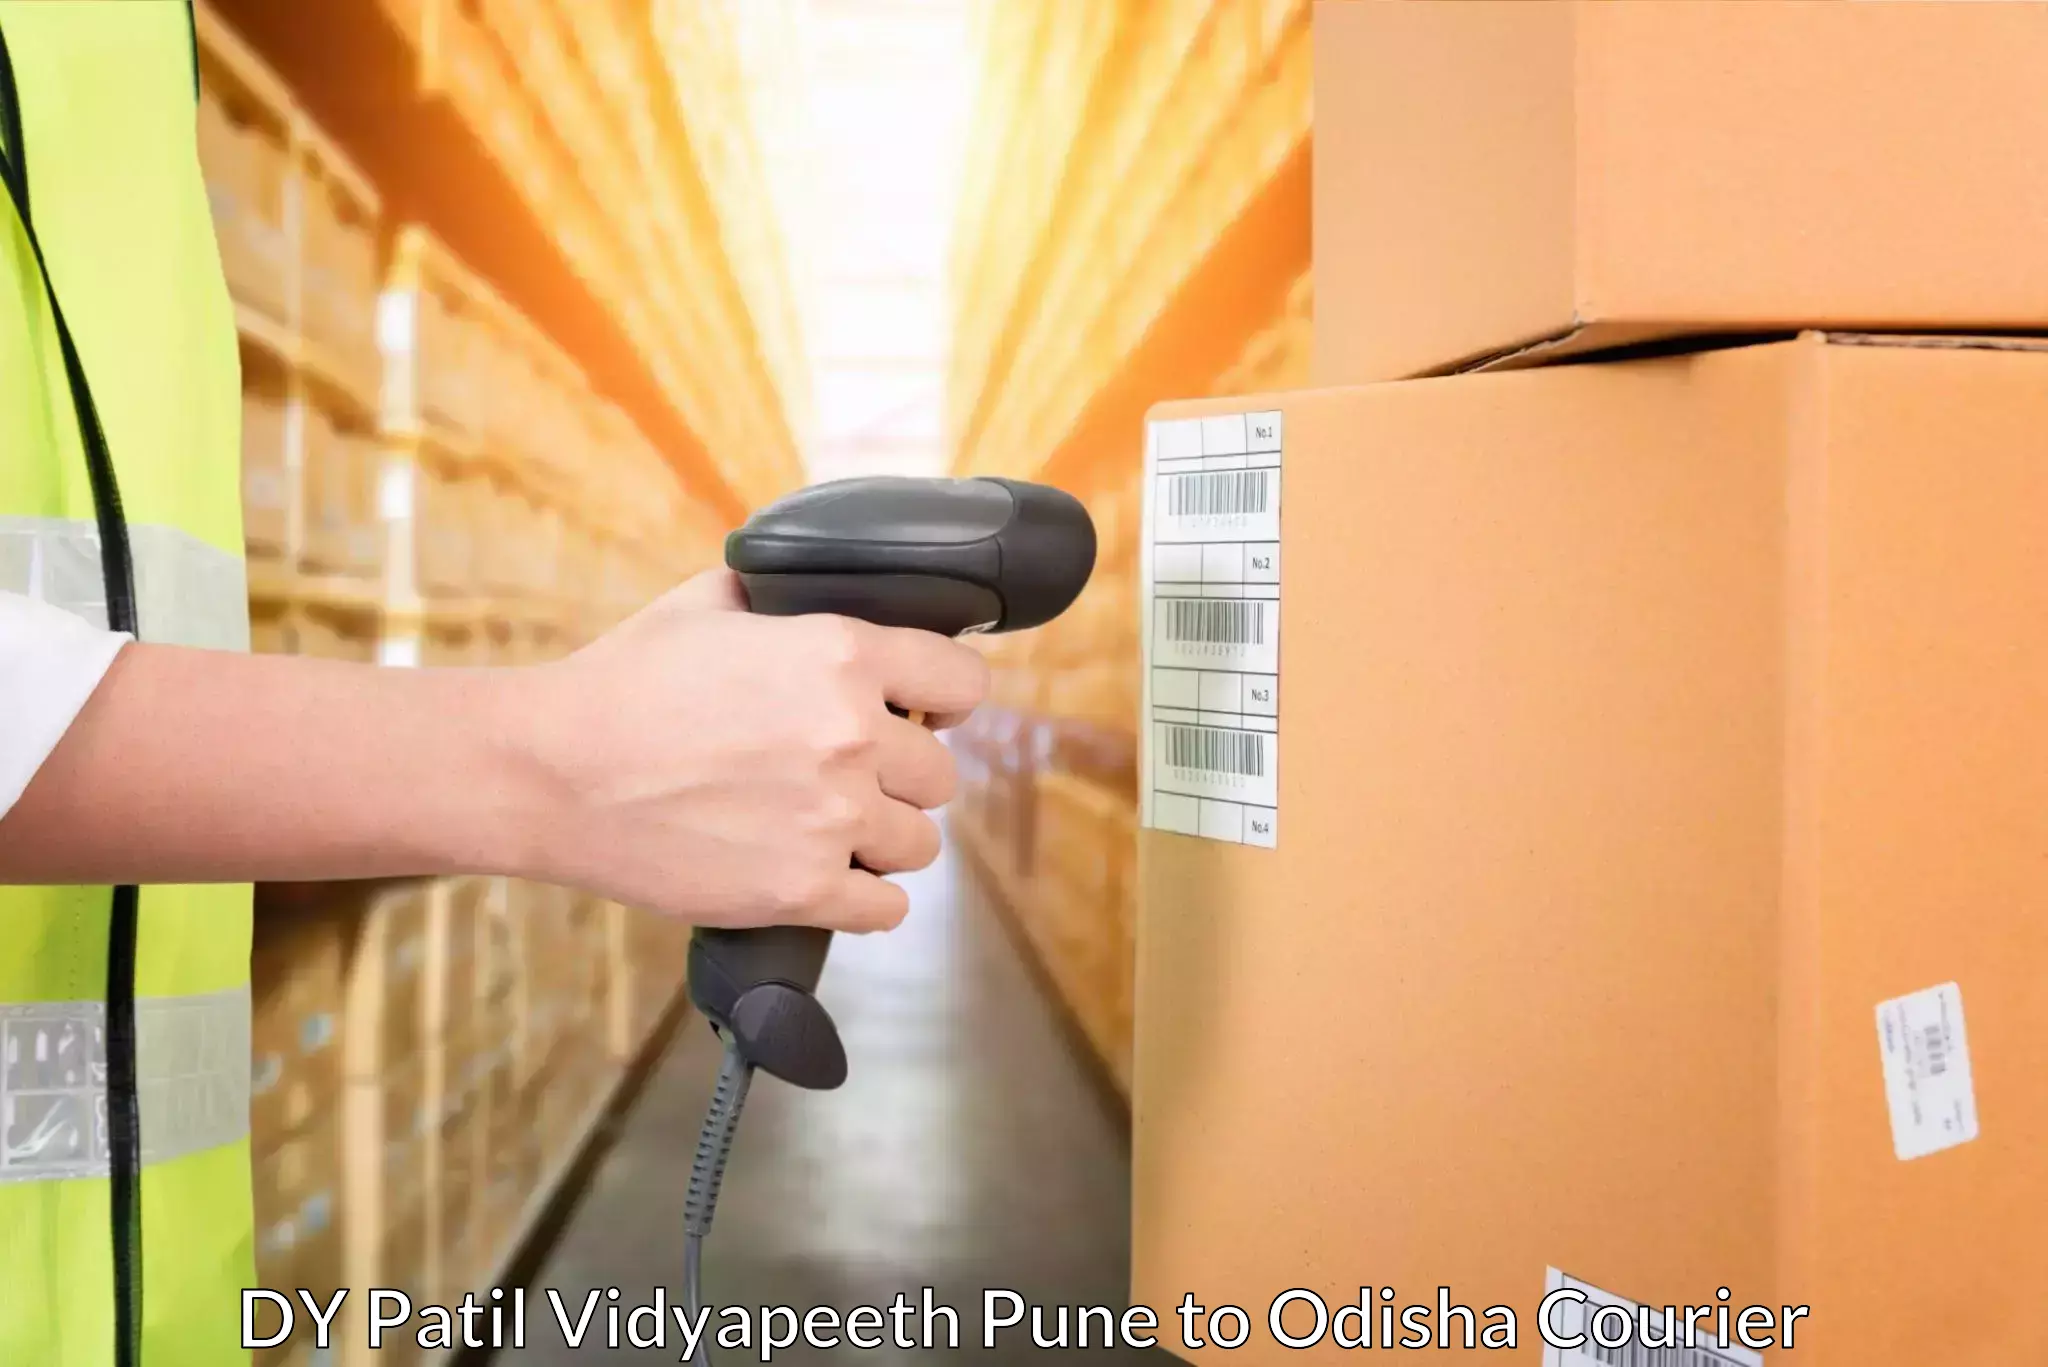 Personal courier services DY Patil Vidyapeeth Pune to Odisha